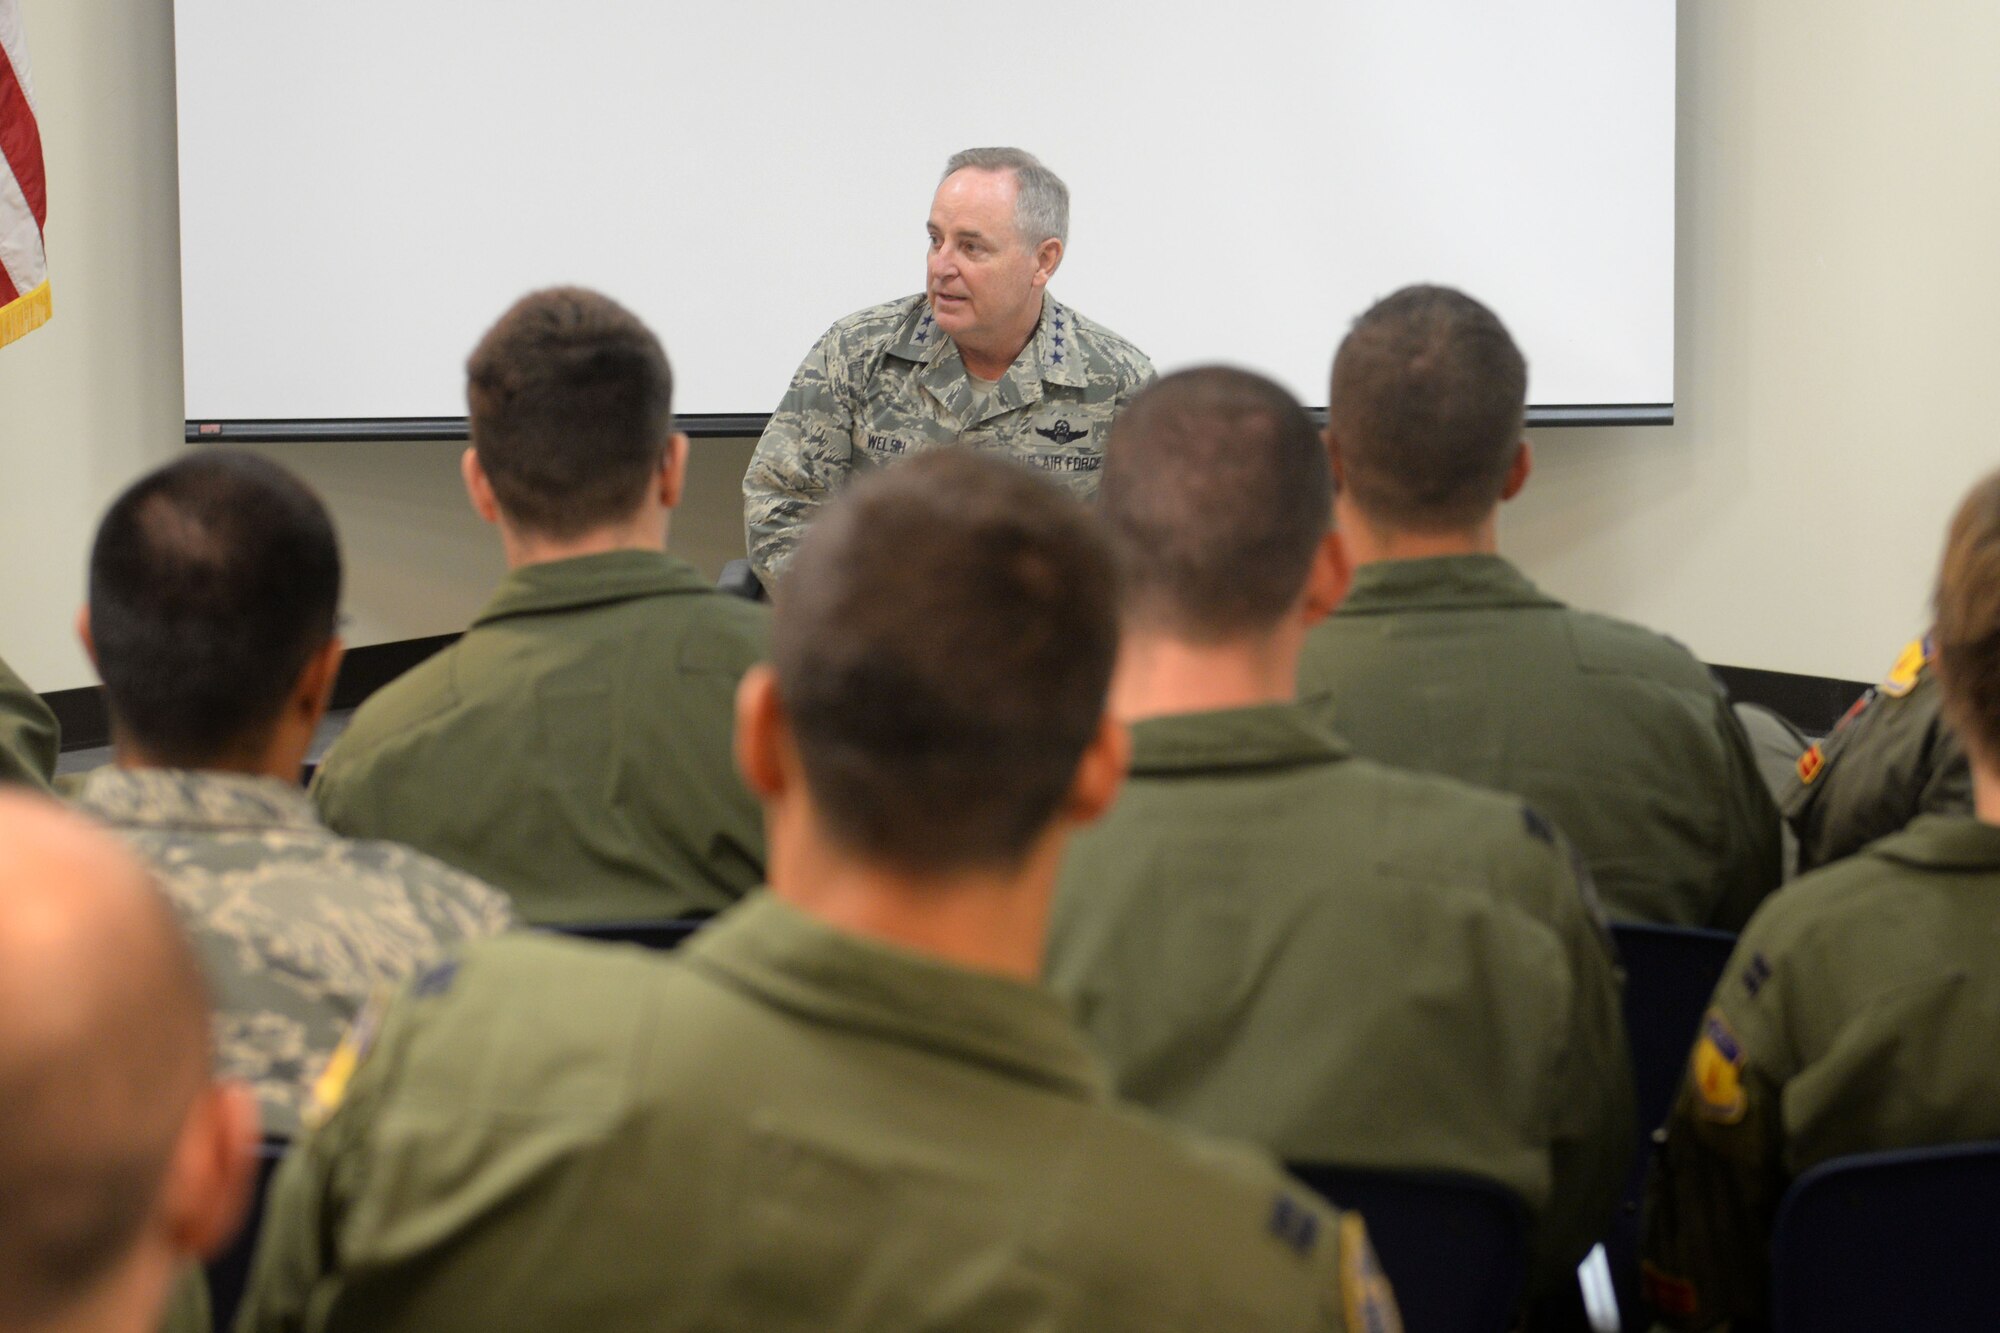 Air Force Chief of Staff Gen. Mark A. Welsh III speaks to officers during his visit Jan. 21, 2016, at Andersen Air Force Base, Guam. During his visit to Andersen, Welsh met with Airmen to thank them for their service and dedication, and to discuss challenges and opportunities in the Pacific theater. (U.S. Air Force photo/Senior Airman Joshua Smoot)